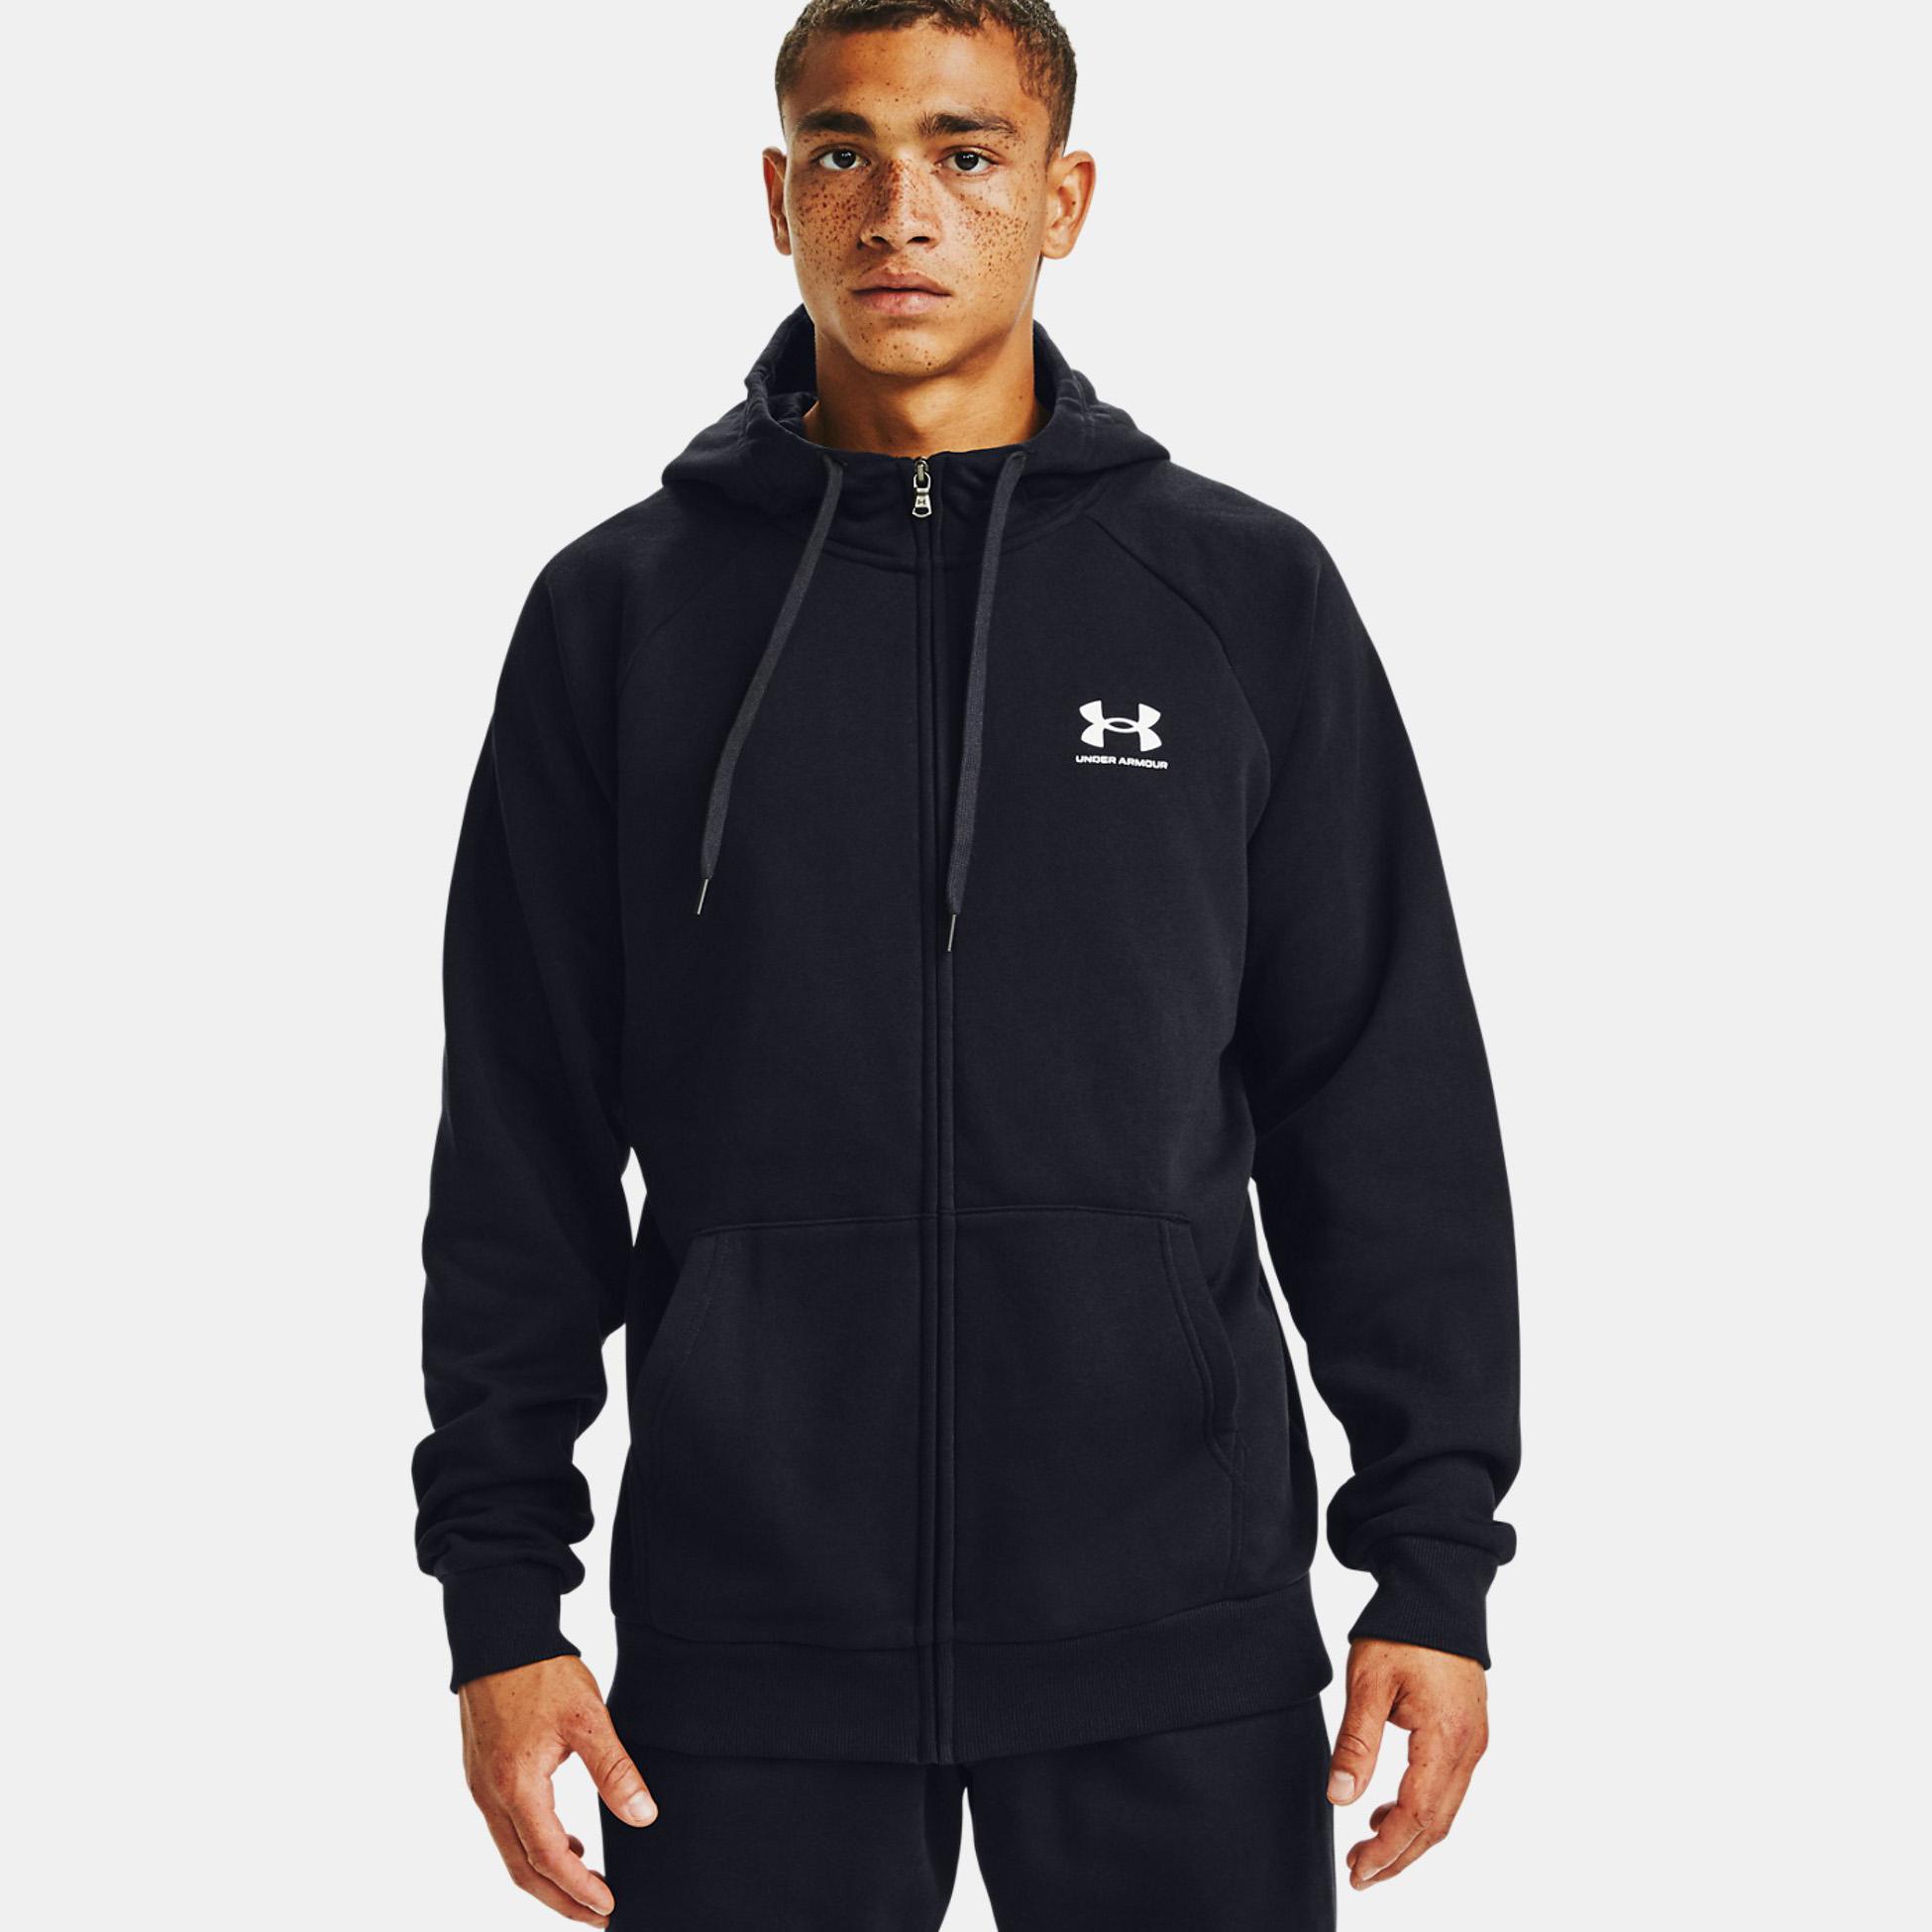 Under Armour UA Rival Fleece Full-Zip Hoodie for $19.78 Shipped